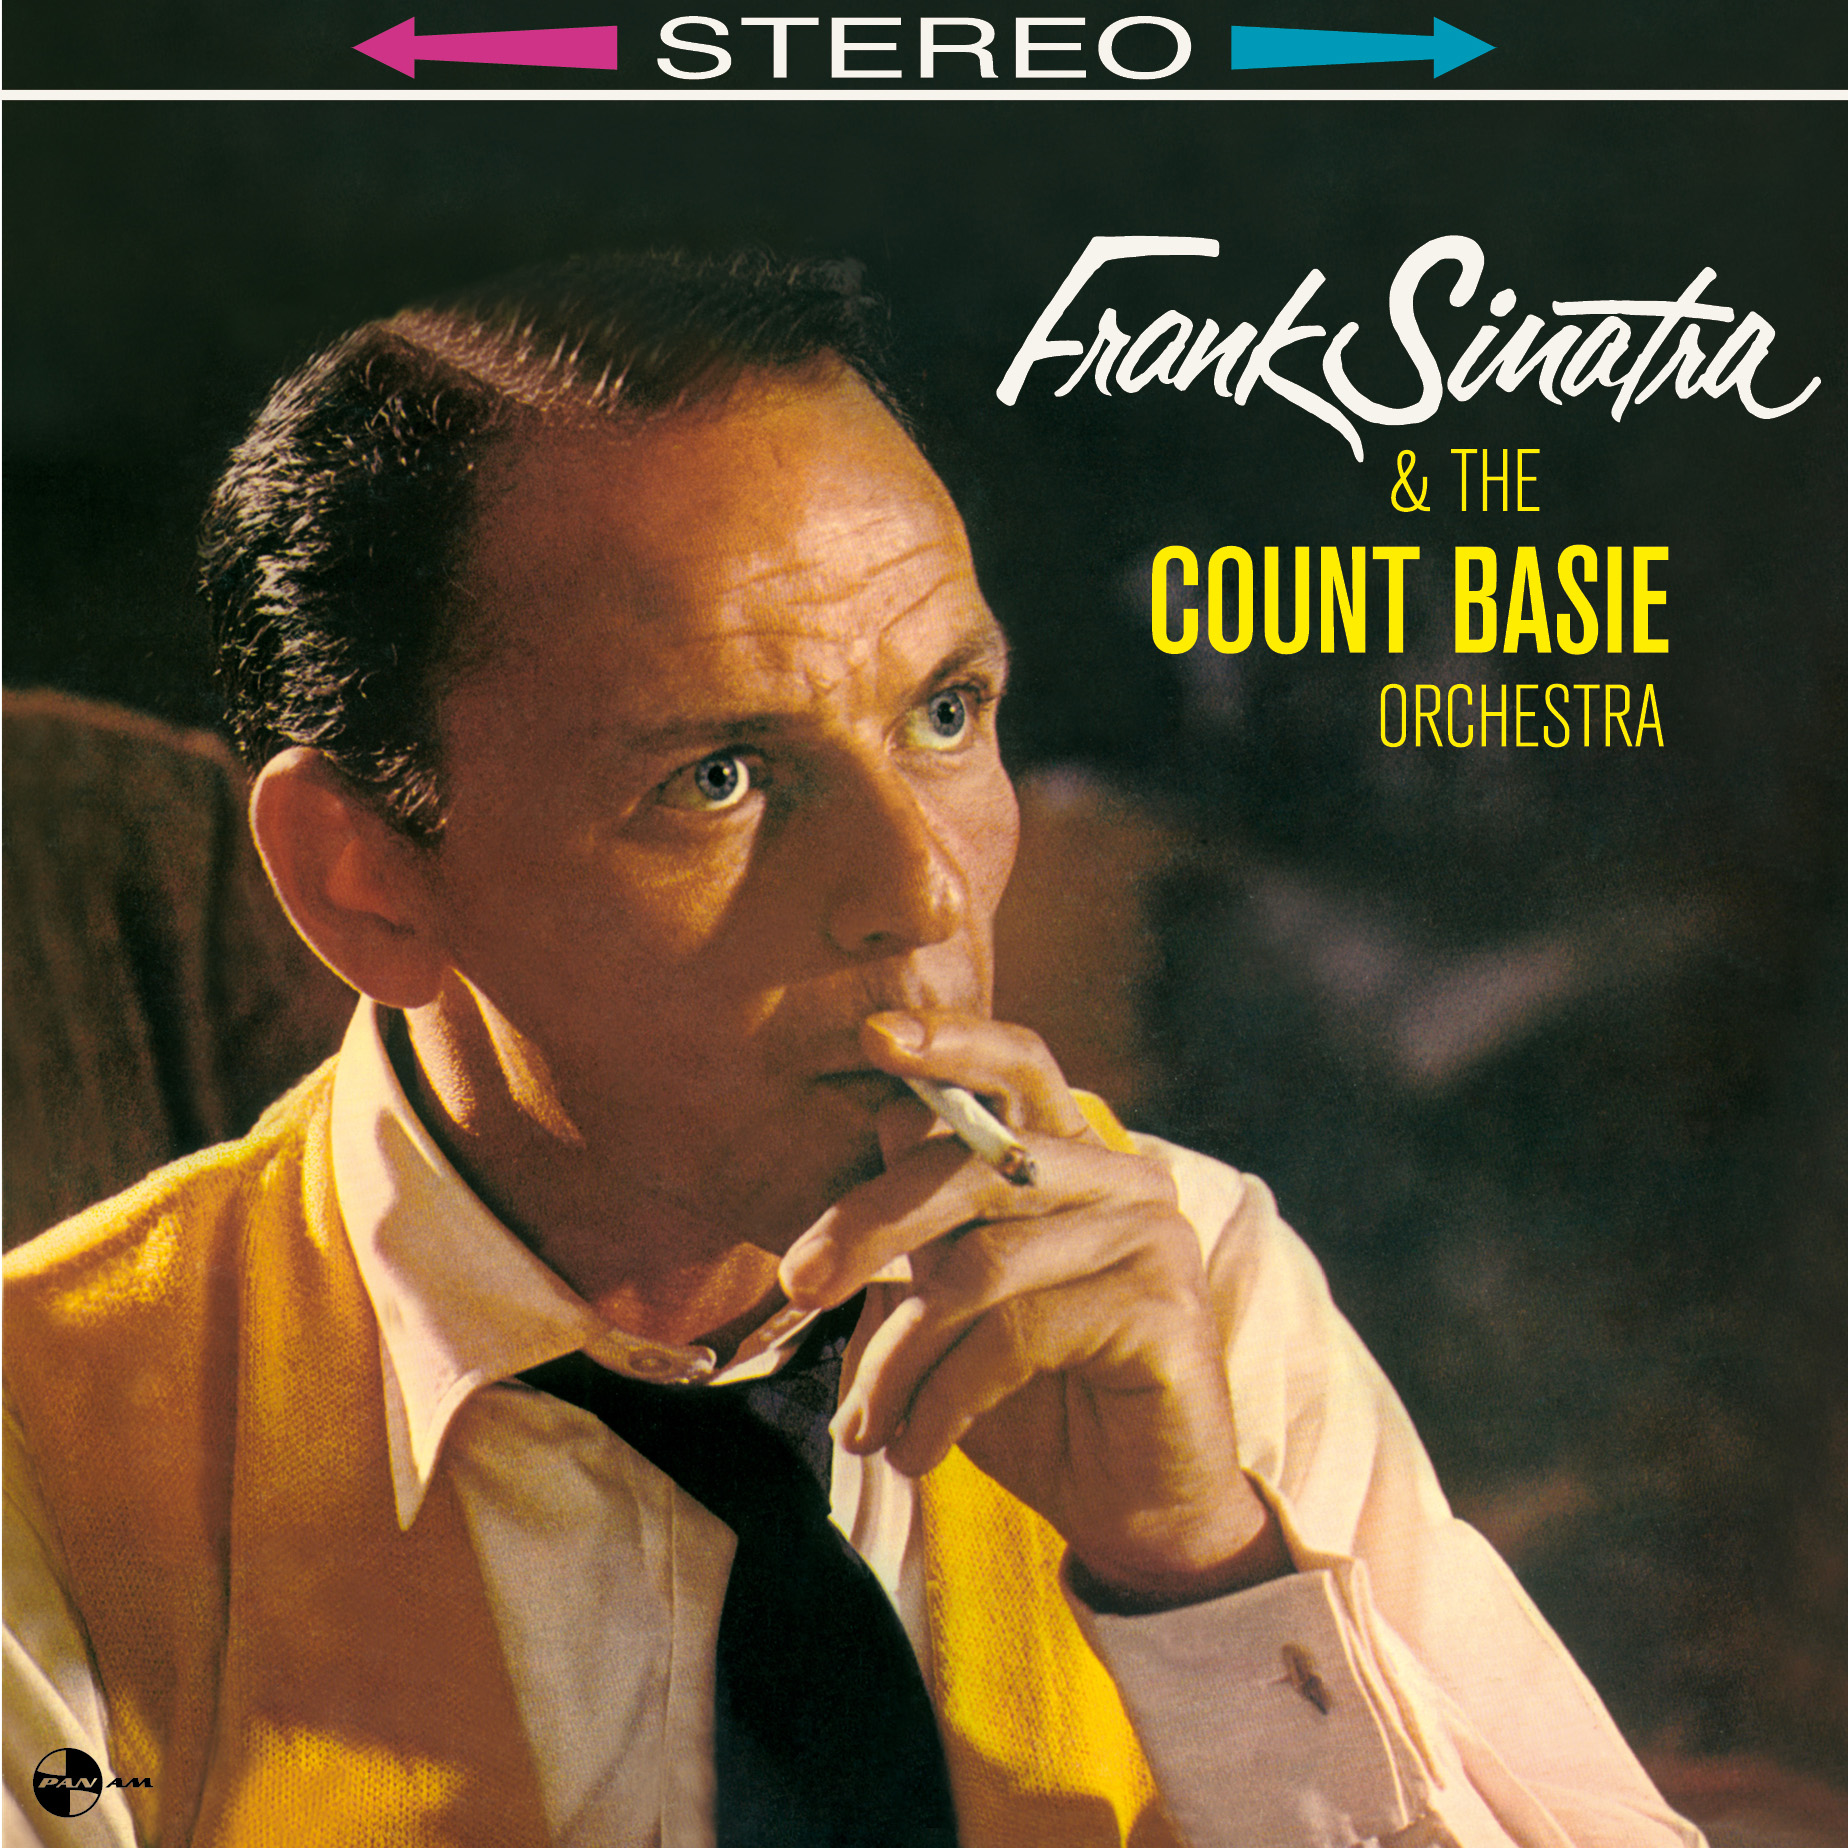 AND THE COUNT BASIE ORCHESTRA [LP]